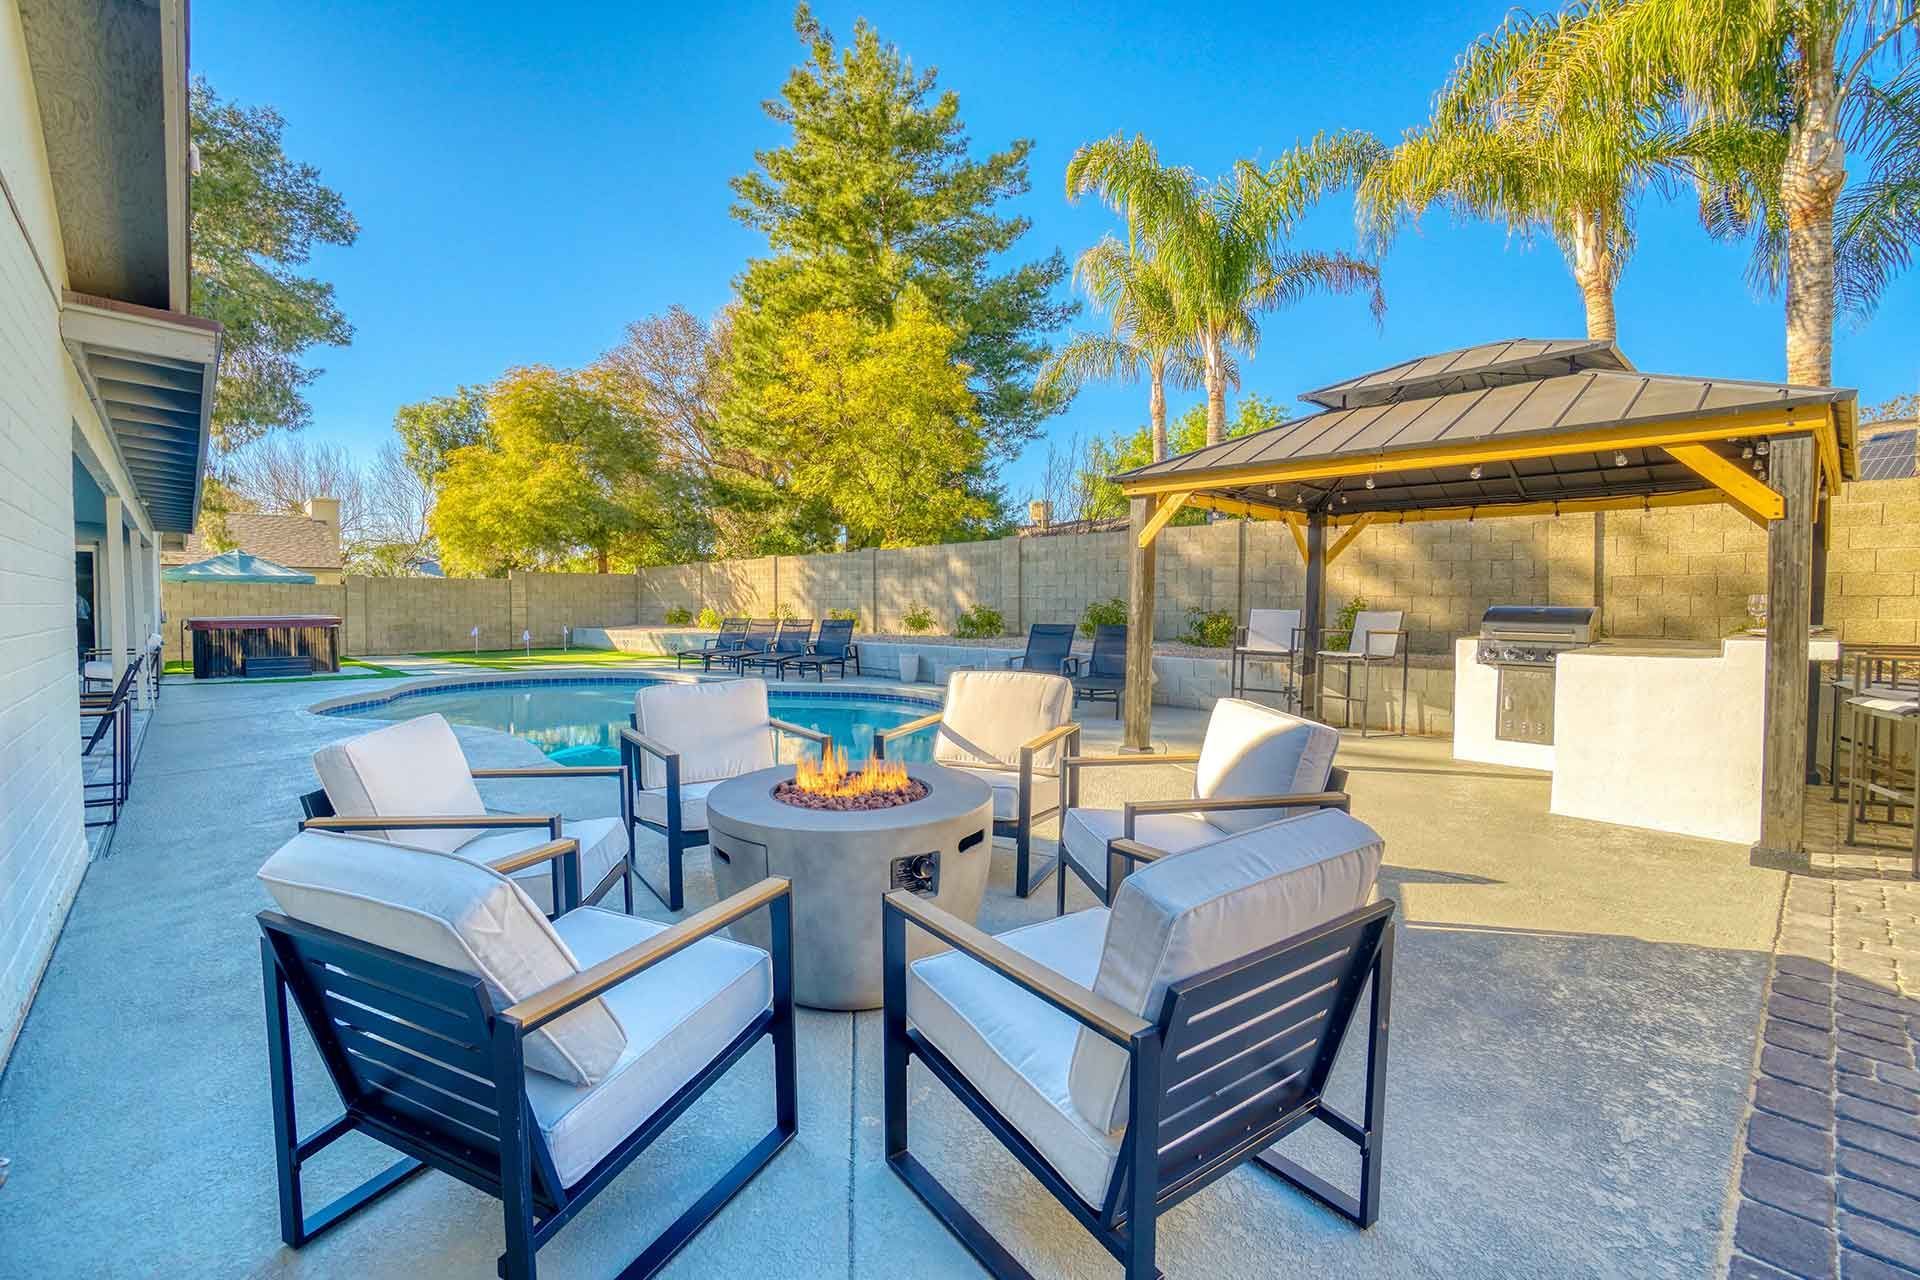 Covered Patio with pool Landscaping, deck, outdoor kitchen, and fire pit for entertainment